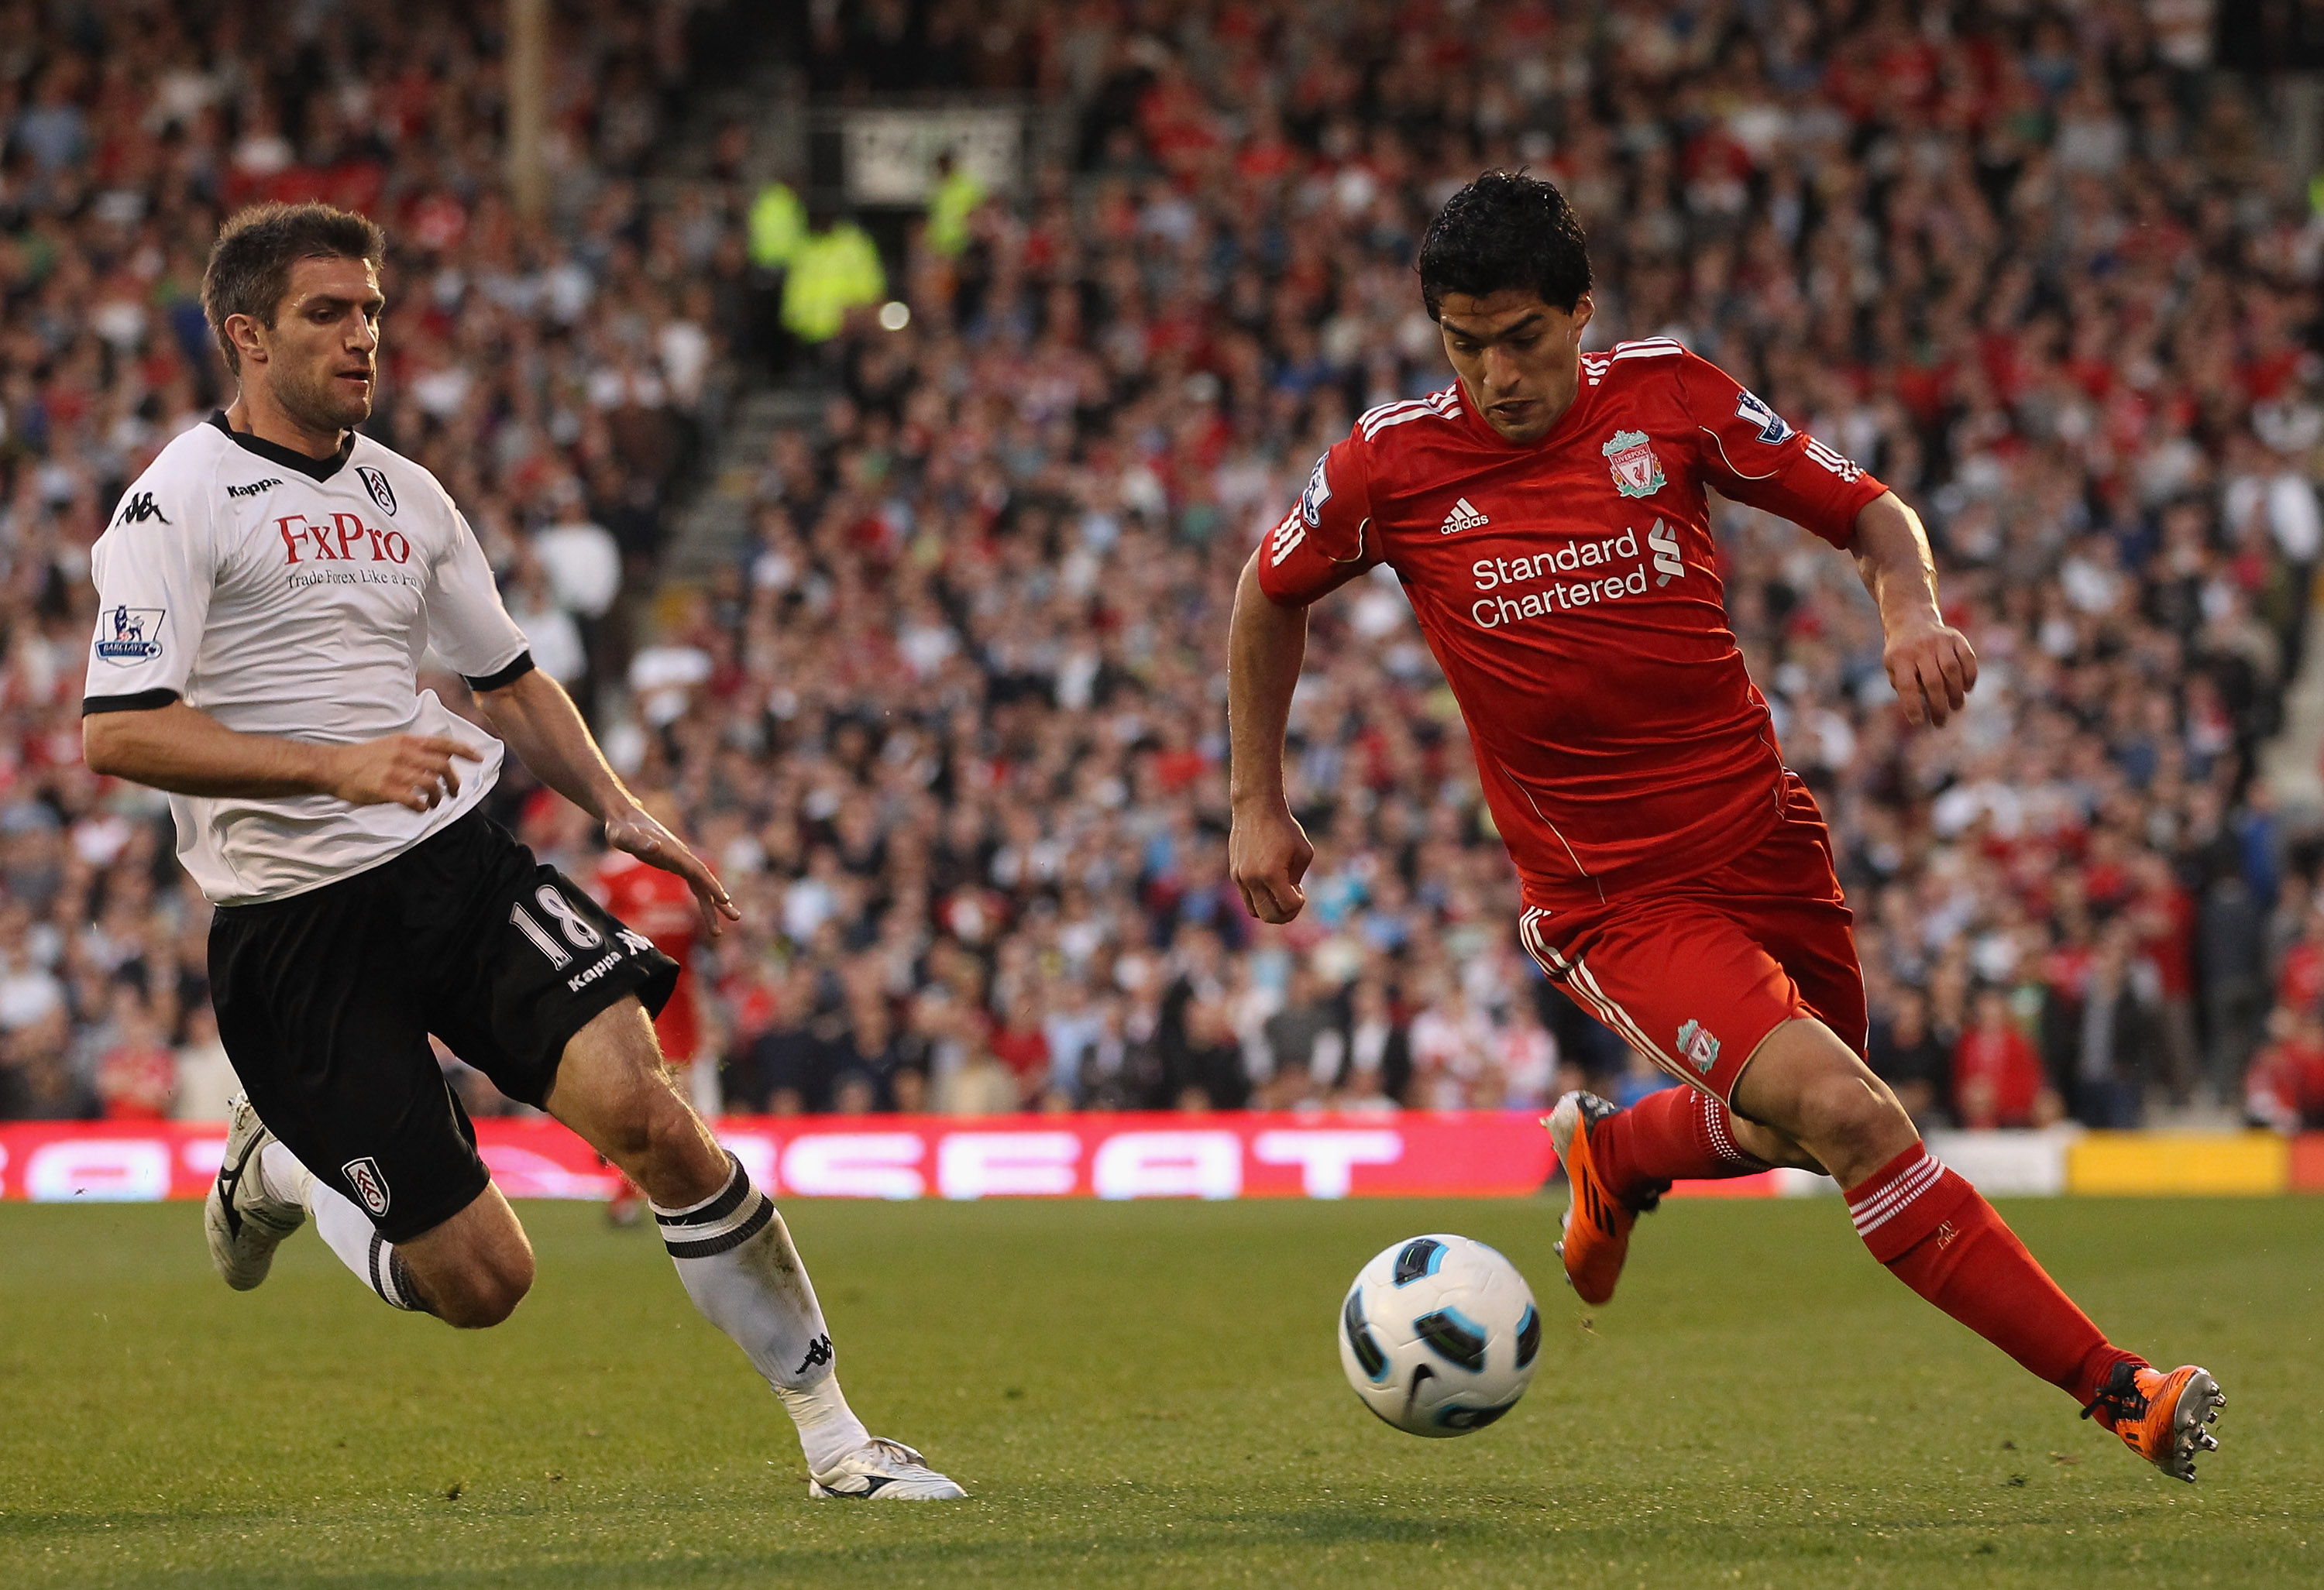 LONDON, ENGLAND - MAY 09:  Luis Suarez of Liverpool is challenged by Aaron Hughes of Fulham during the Barclays Premier League match between Fulham and Liverpool at Craven Cottage on May 9, 2011 in London, England.  (Photo by Scott Heavey/Getty Images)